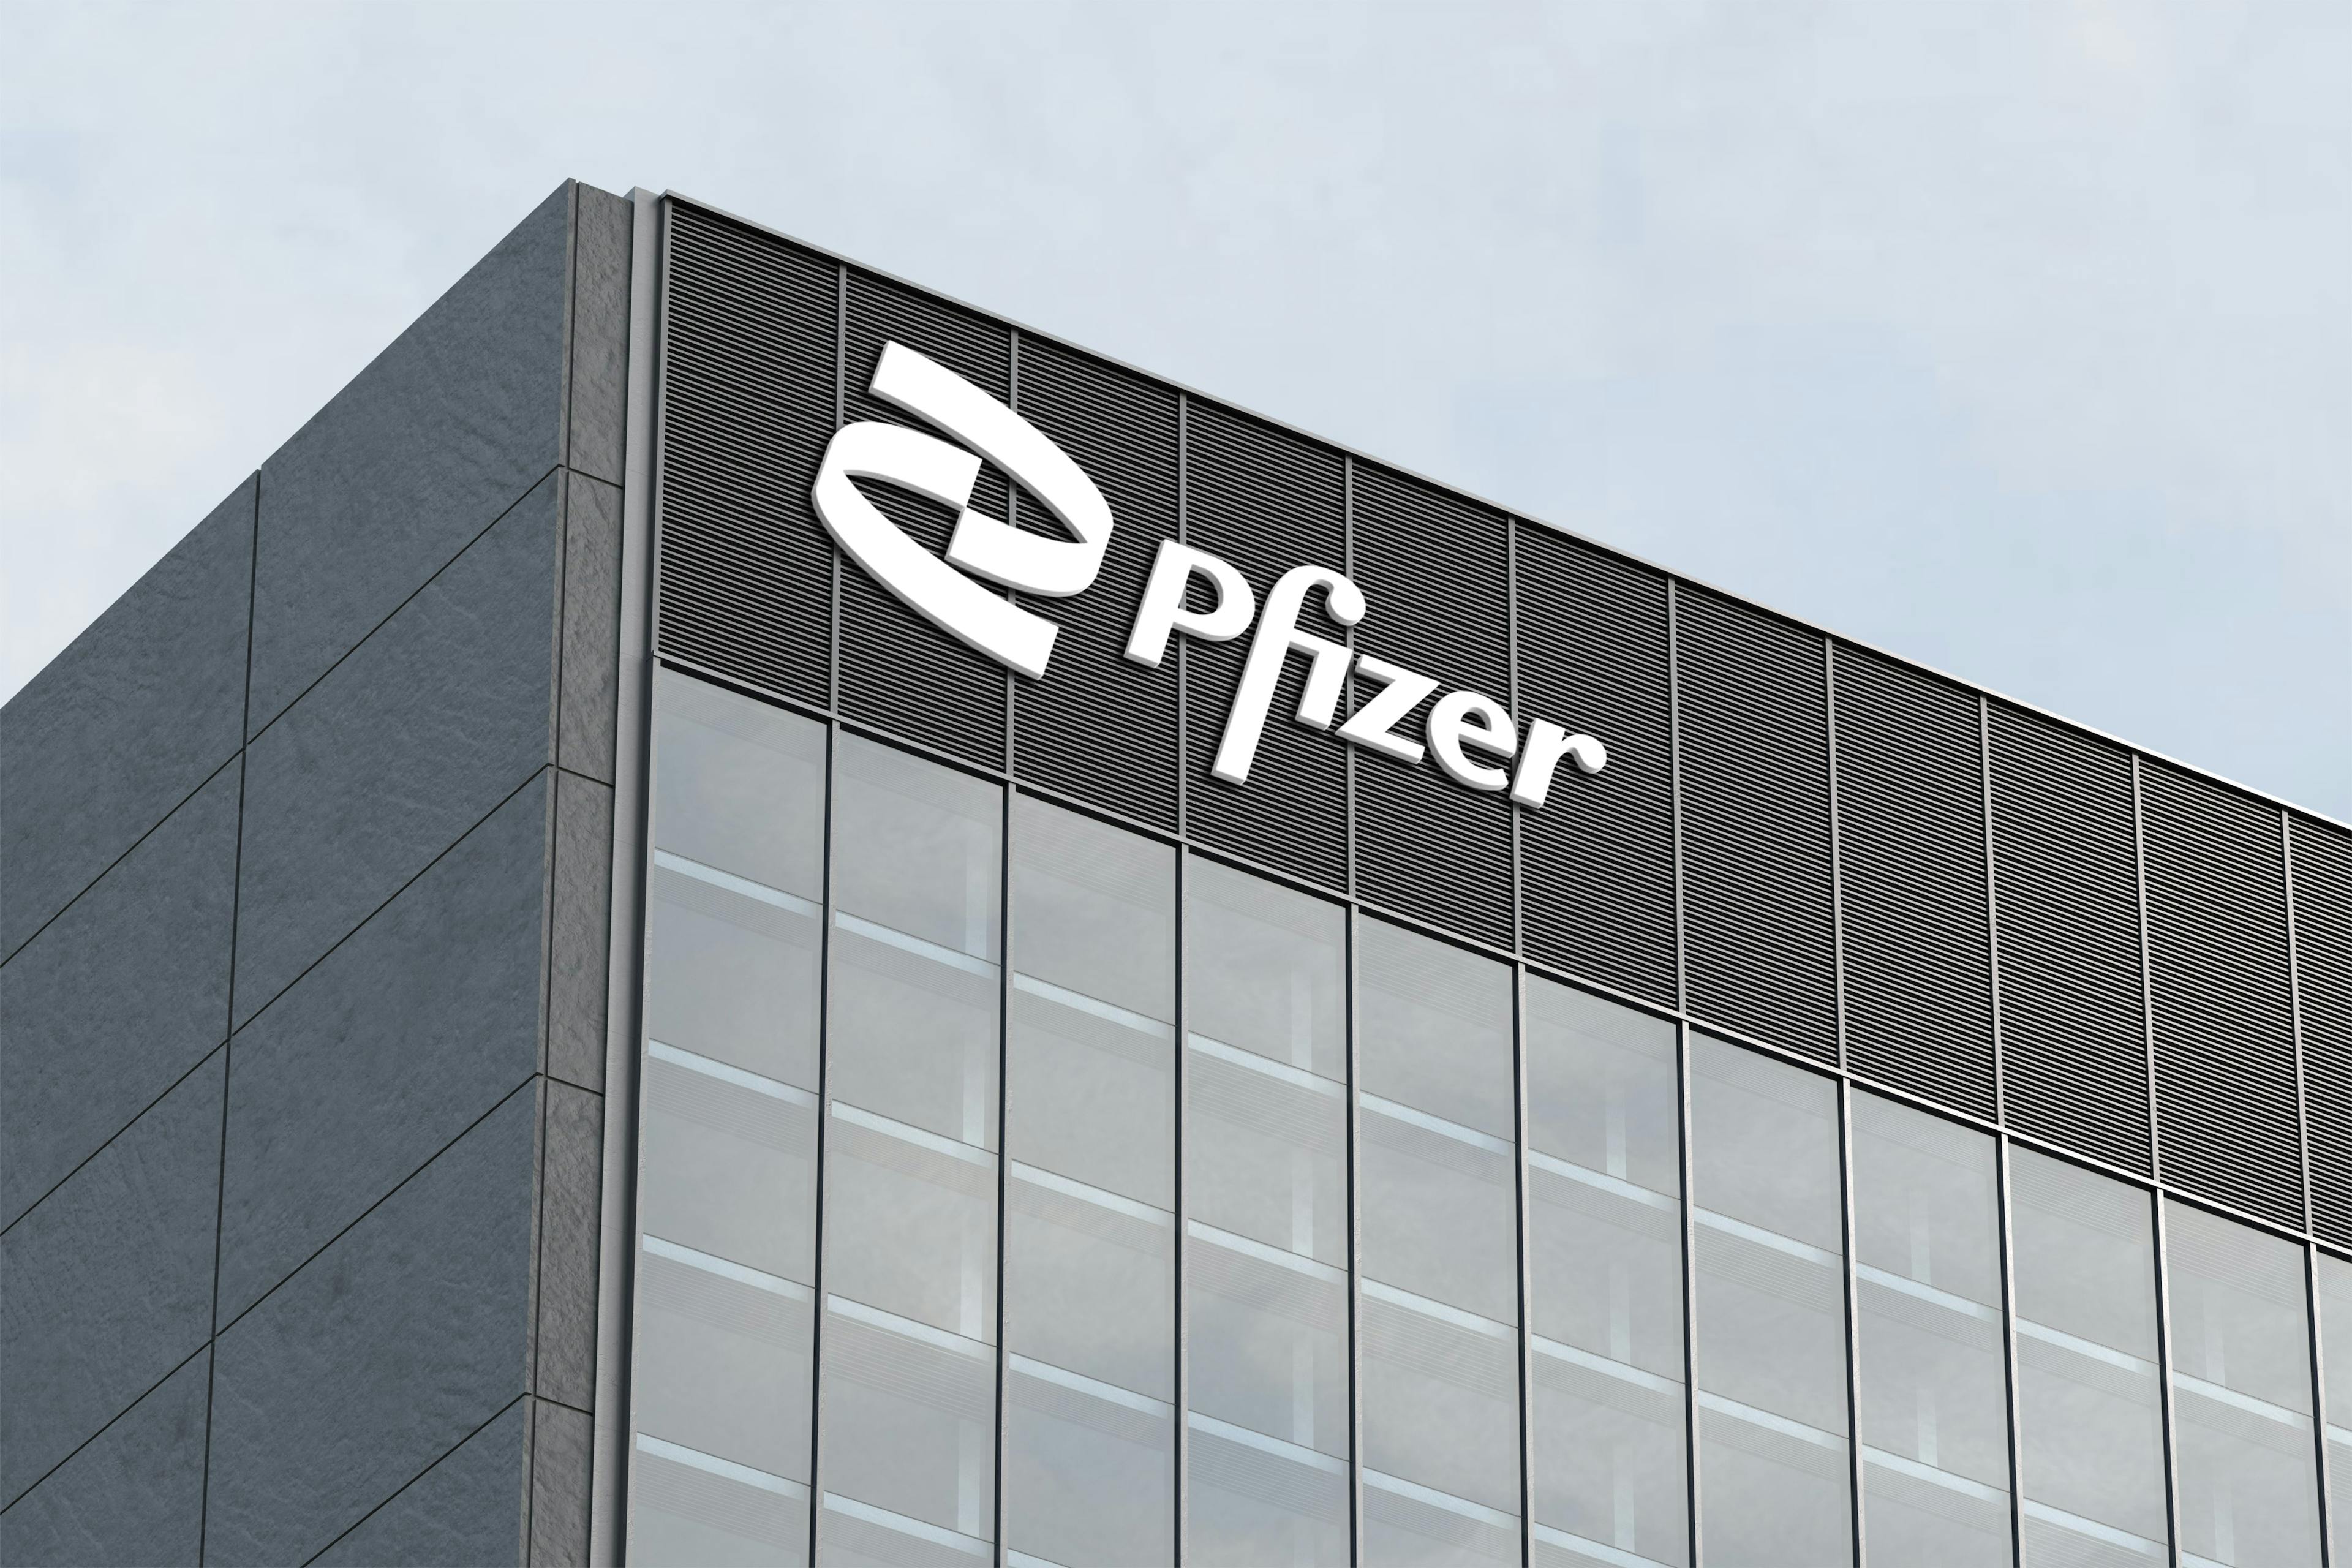 A cropped view of a concrete and glass skyscraper. Pfizer's name and logo is on the building.